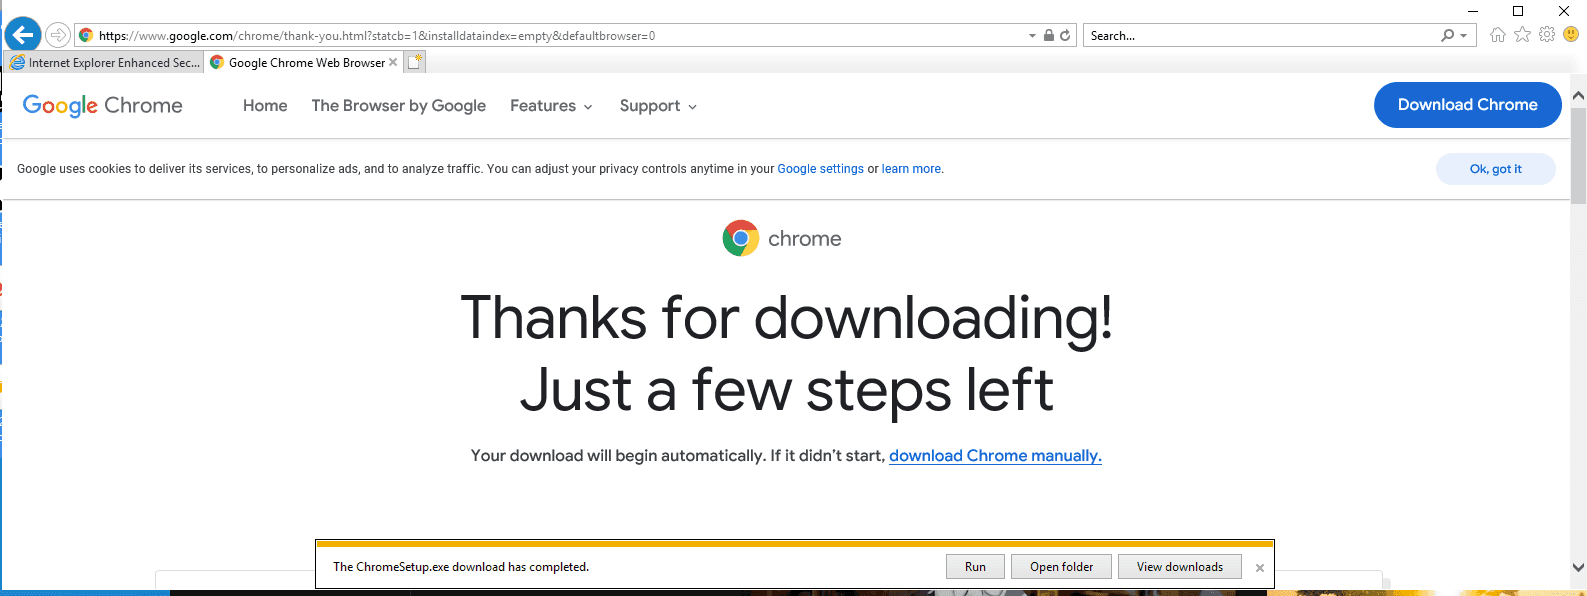 Once File Download is enabled, you can download Chrome.